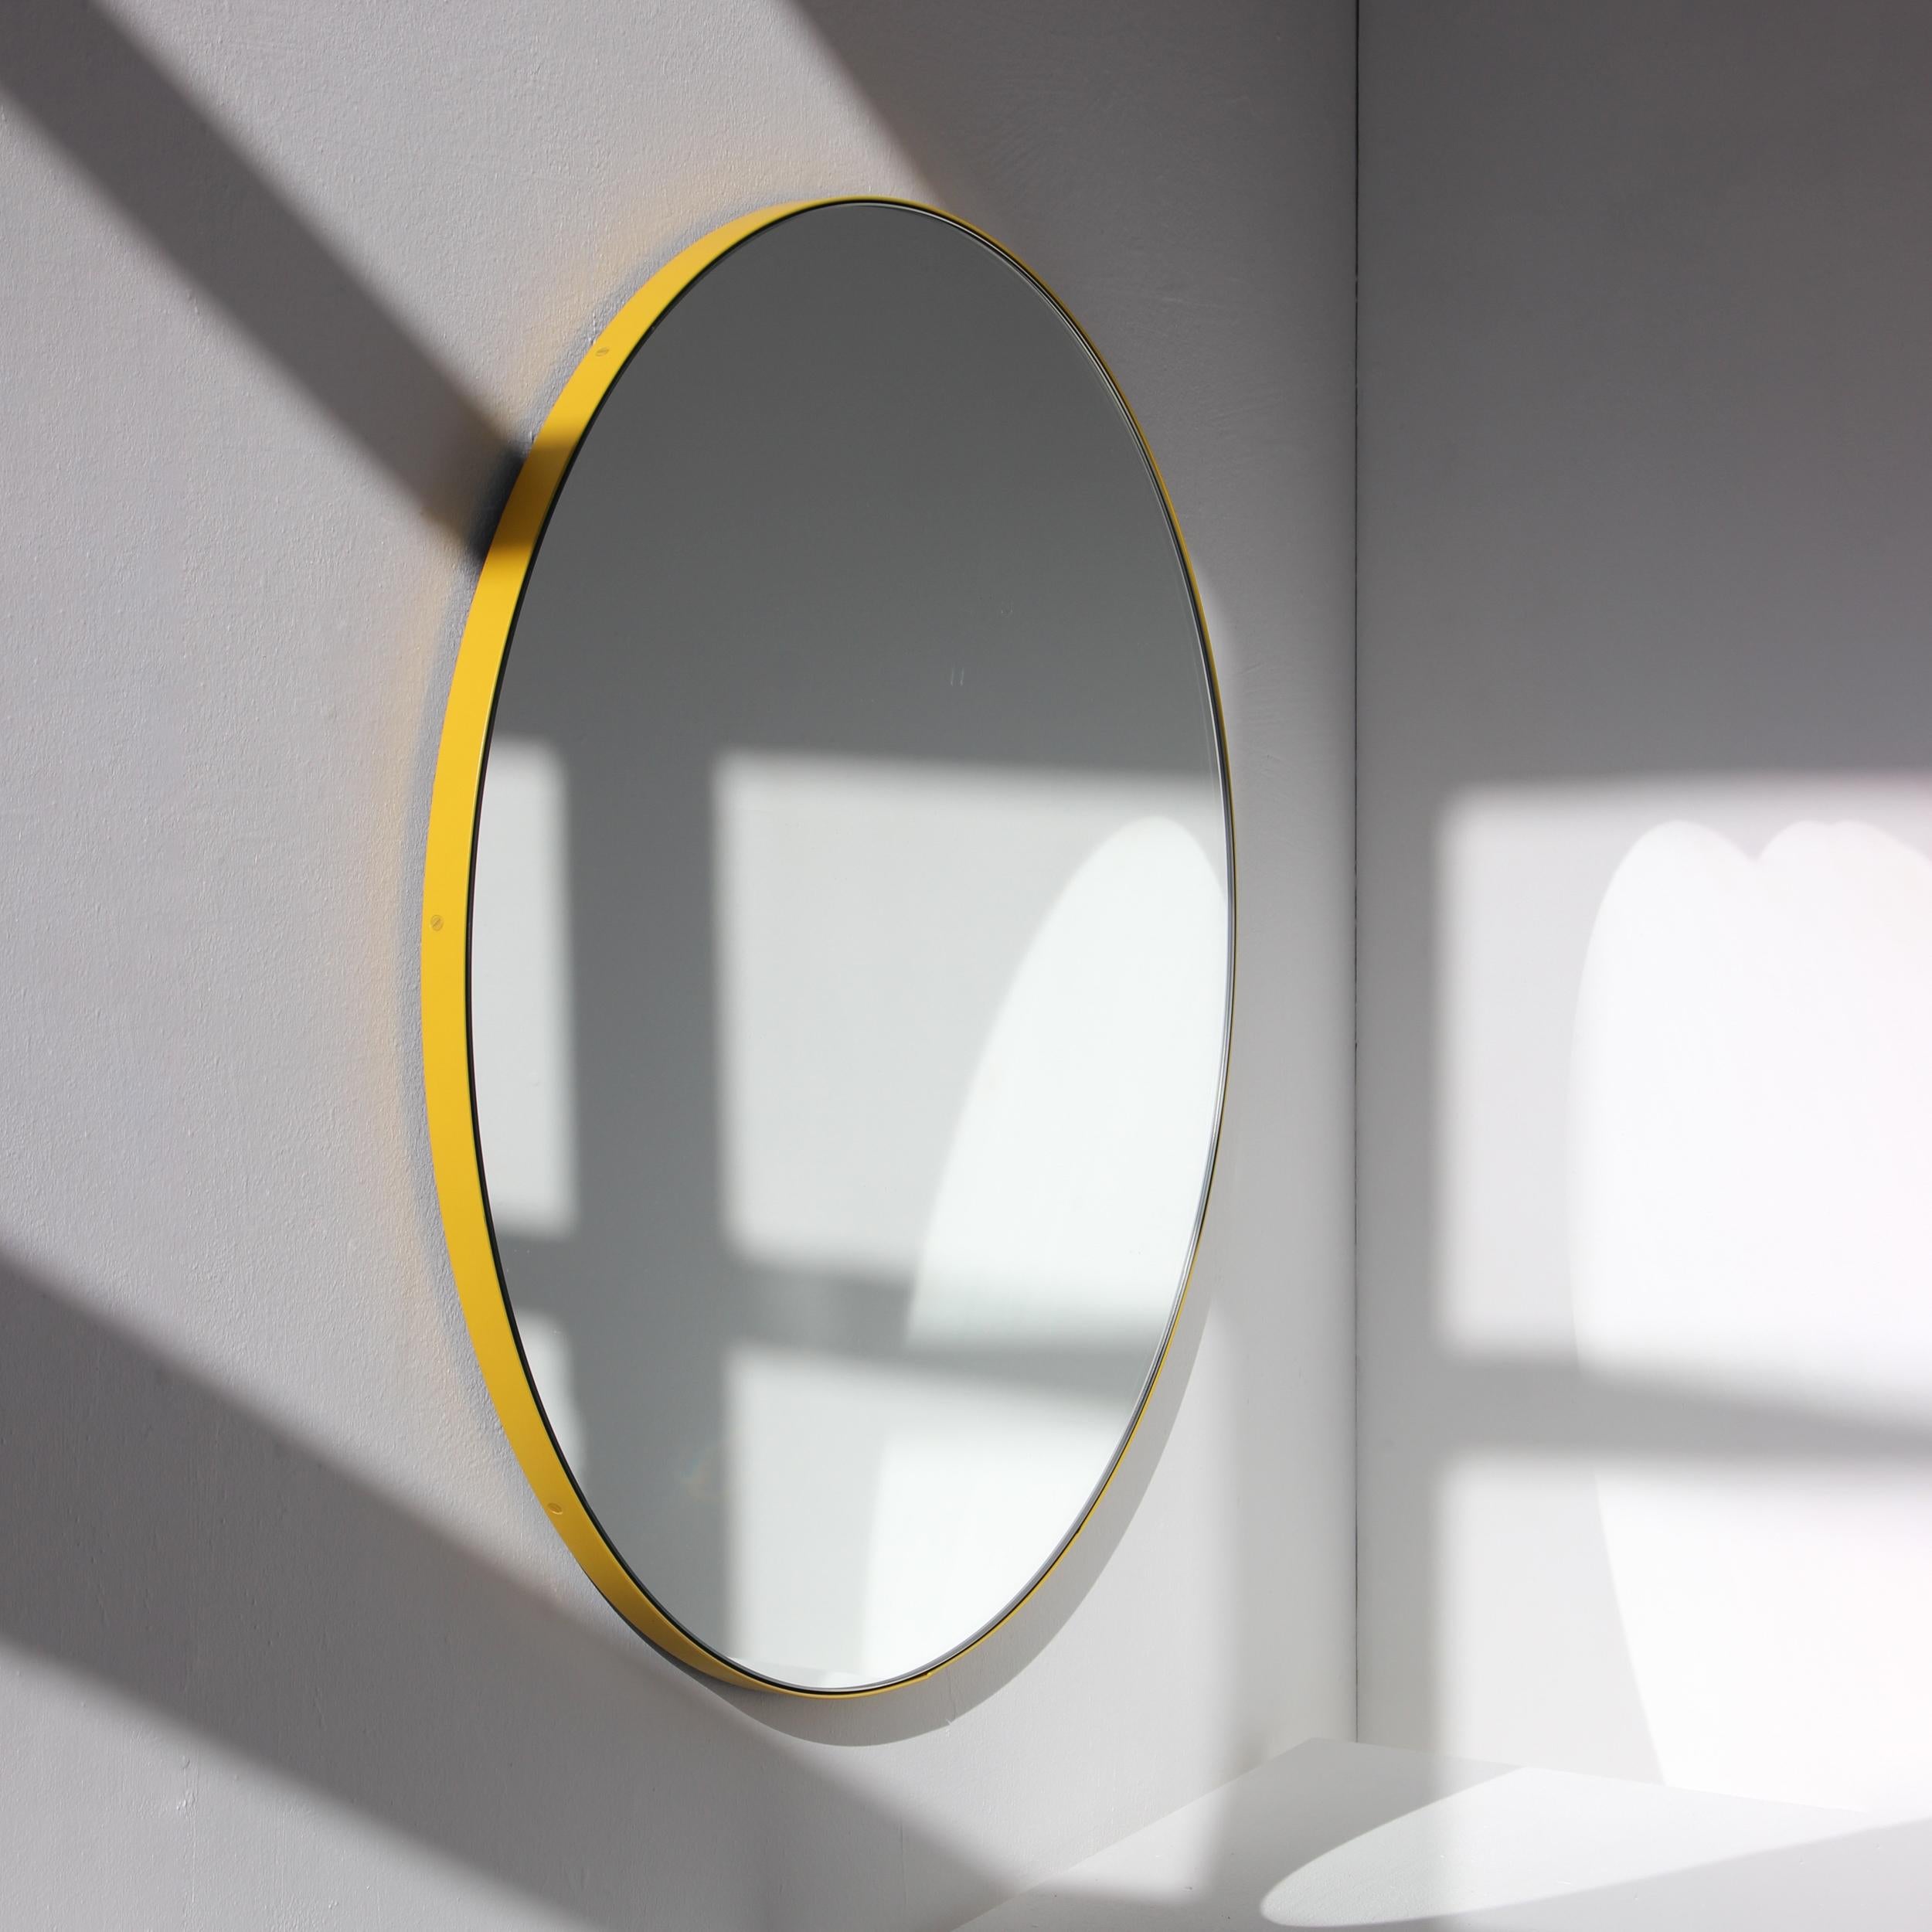 Minimalist round mirror with a modern aluminium powder coated yellow frame. Designed and handcrafted in London, UK.

Our mirrors are designed with an integrated French cleat (split batten) system that ensures the mirror is securely mounted flush